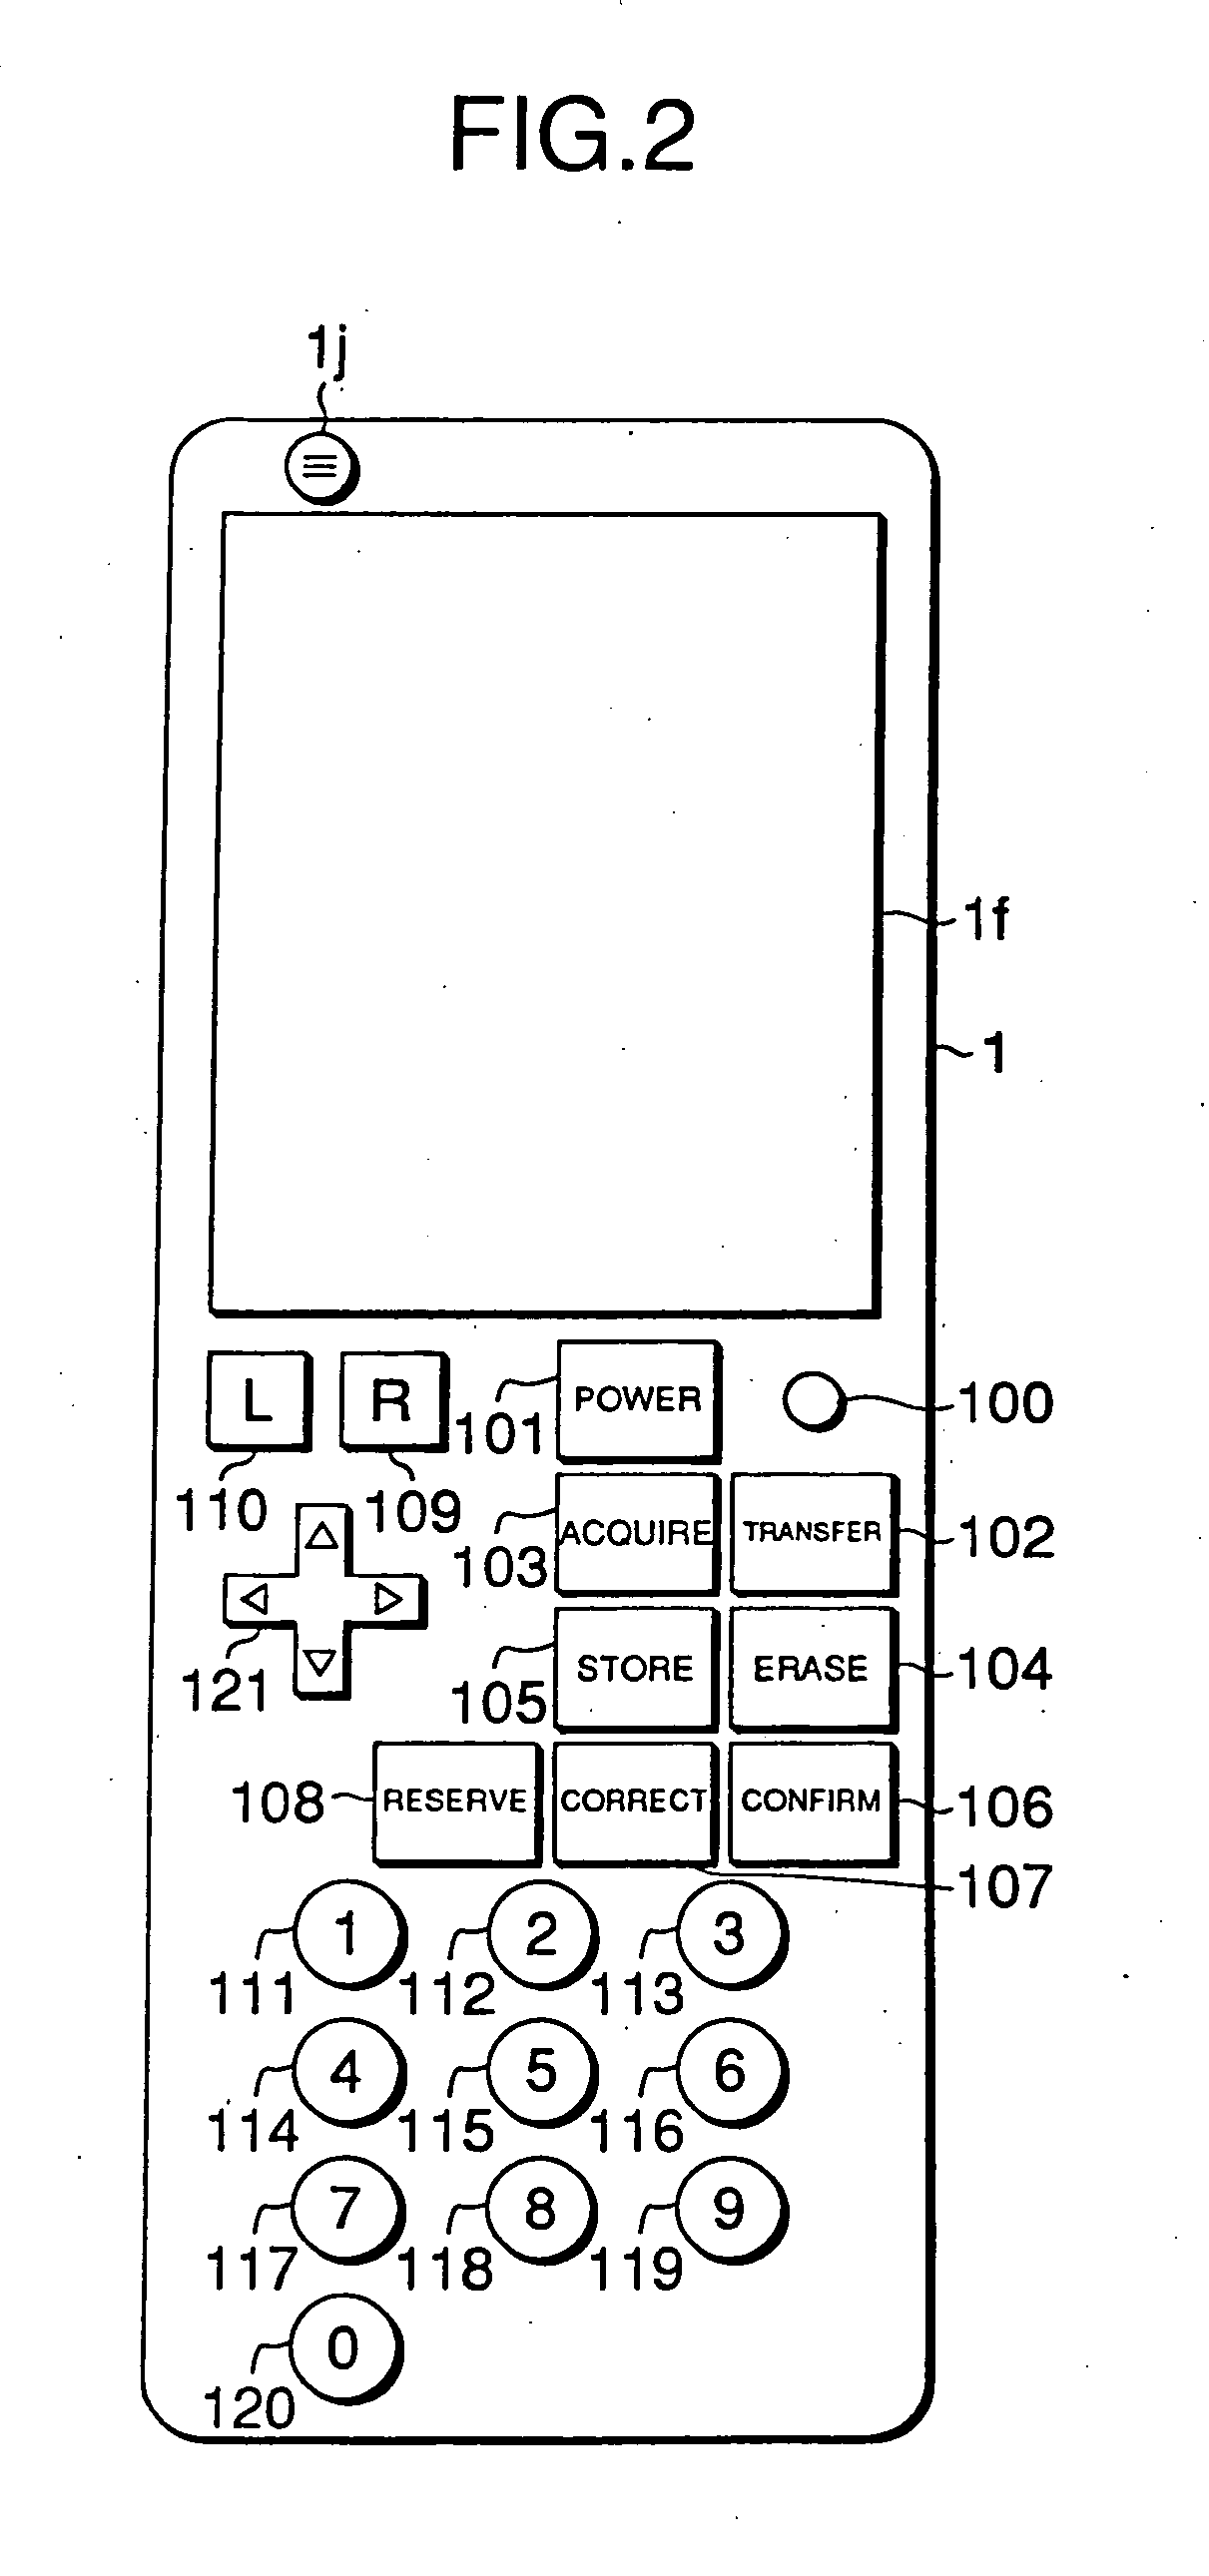 Control device, control method, electric apparatus, control method of an electric apparatus, electric apparatus system, control method of an apparatus system, and transmission medium